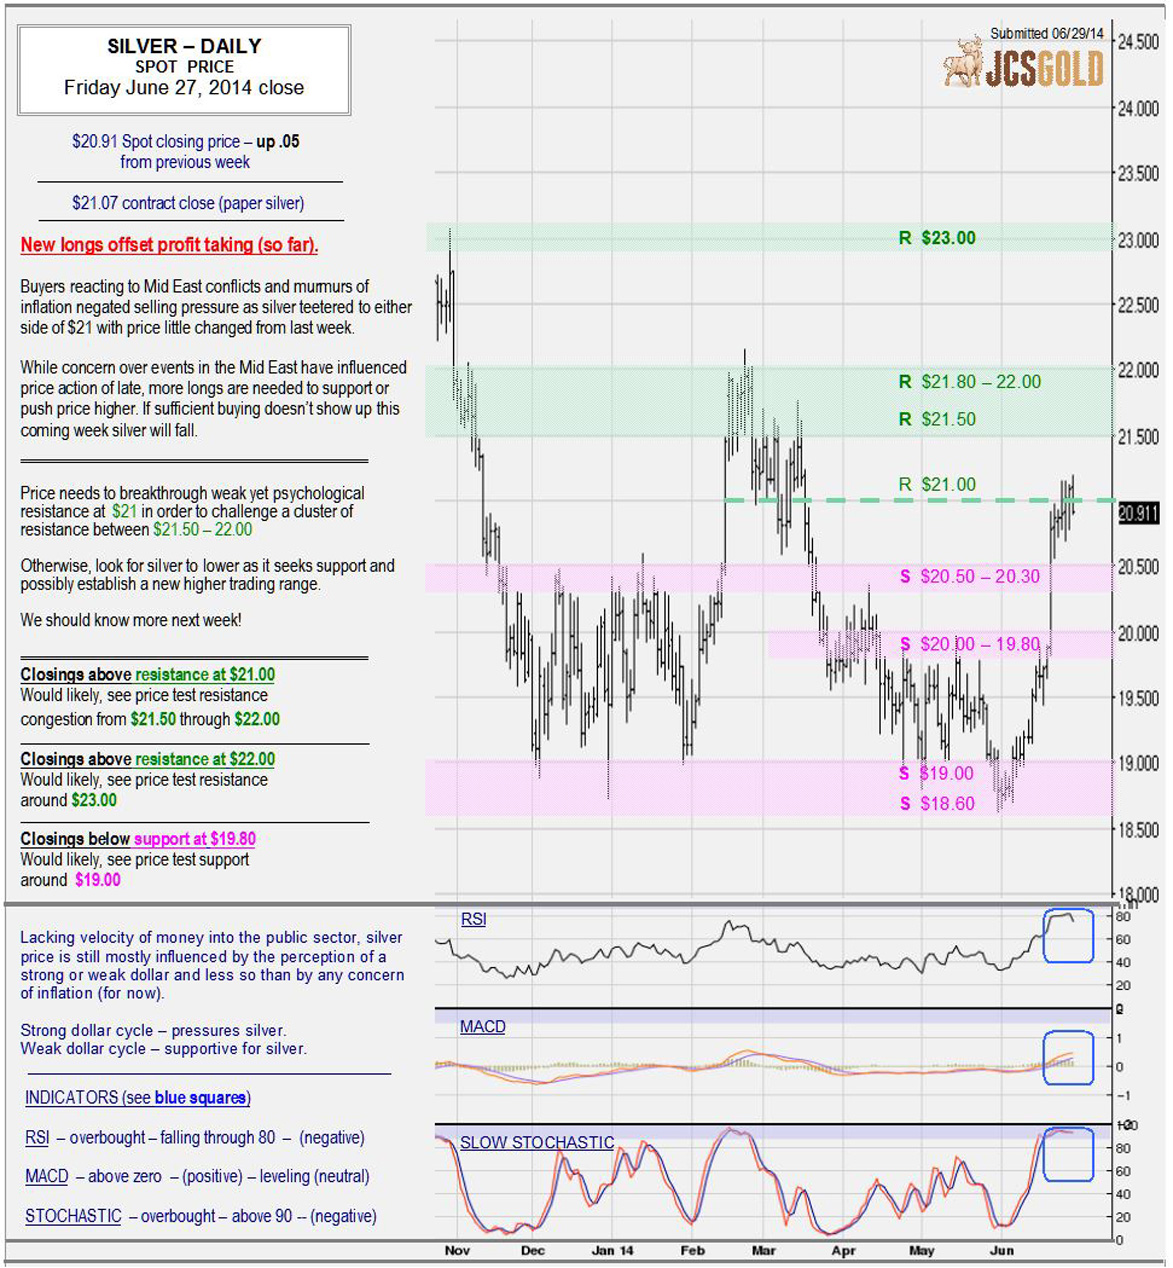 June 27, 2014 chart & commentary